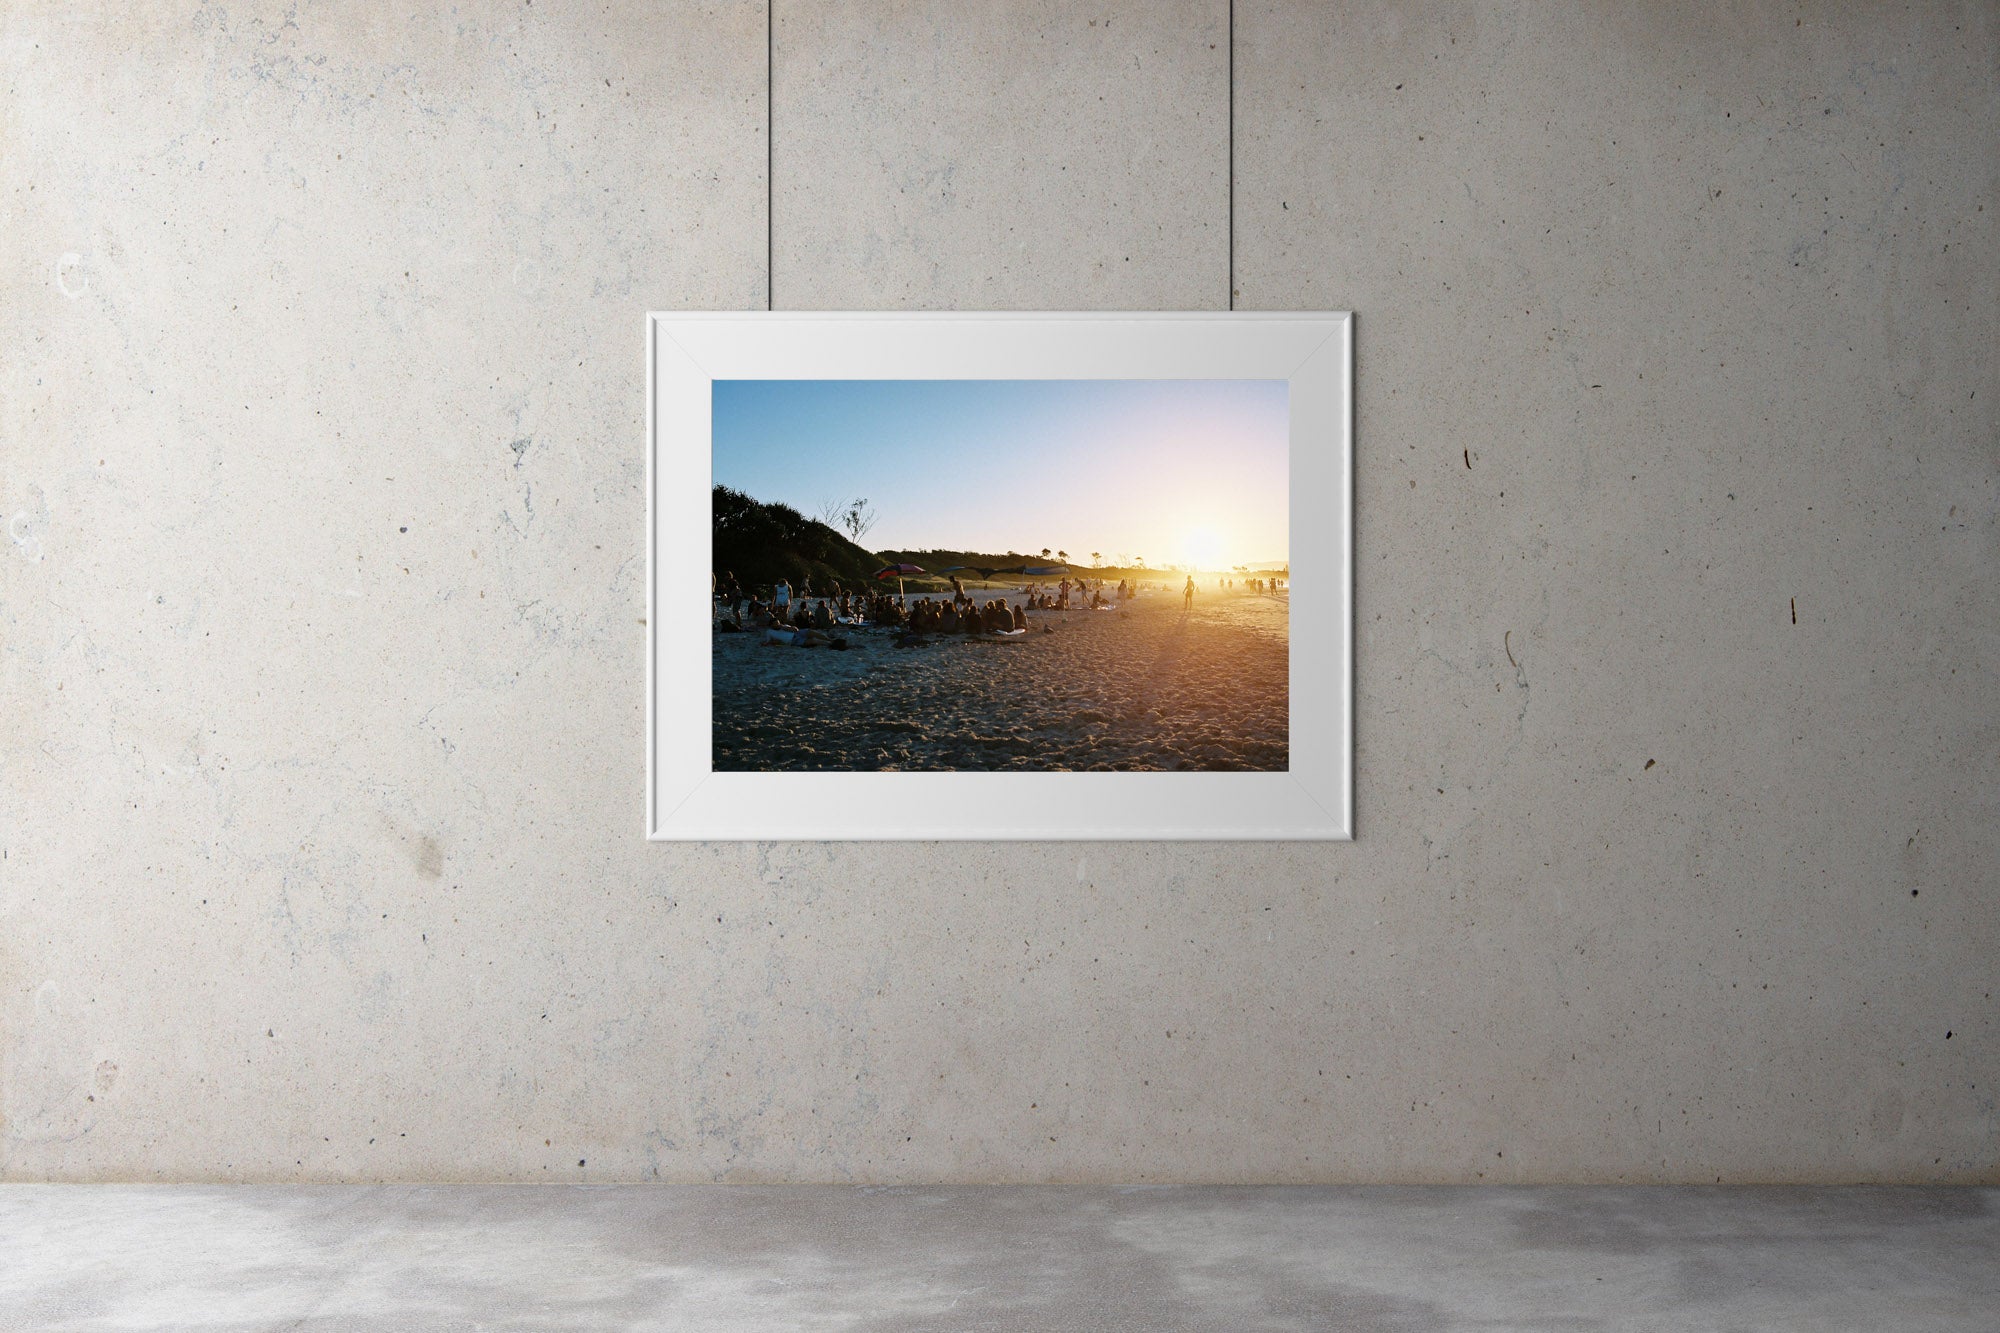 People sit in groups on the beach at sunset in Byron bay. The sun is low & the beach & blue water looks warm.  People are walking in the distance, blue calm water, blue sky.  Artwork Prints, wallart,  Photographic prints,  Framed artwork,  Australian  Photography, wall art, beach prints, coastal prints, ocean prints,  Film photography, Vintage photo, style  Interior design, Pictures Abstract film photography, photography art, Australia, sun, beach,